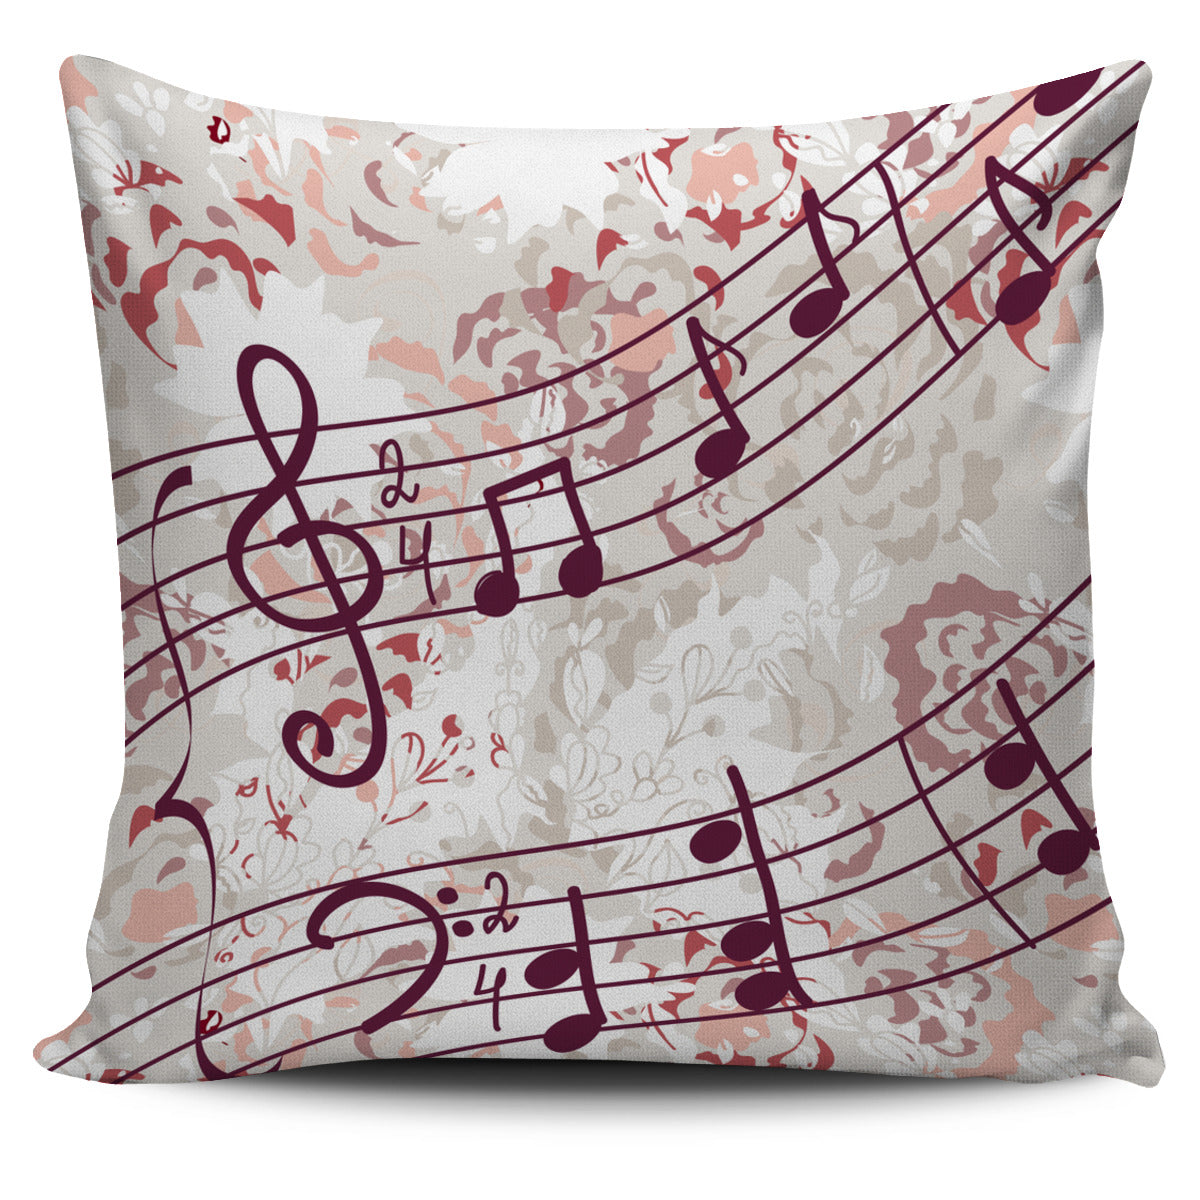 Music Flow Pillow Cover